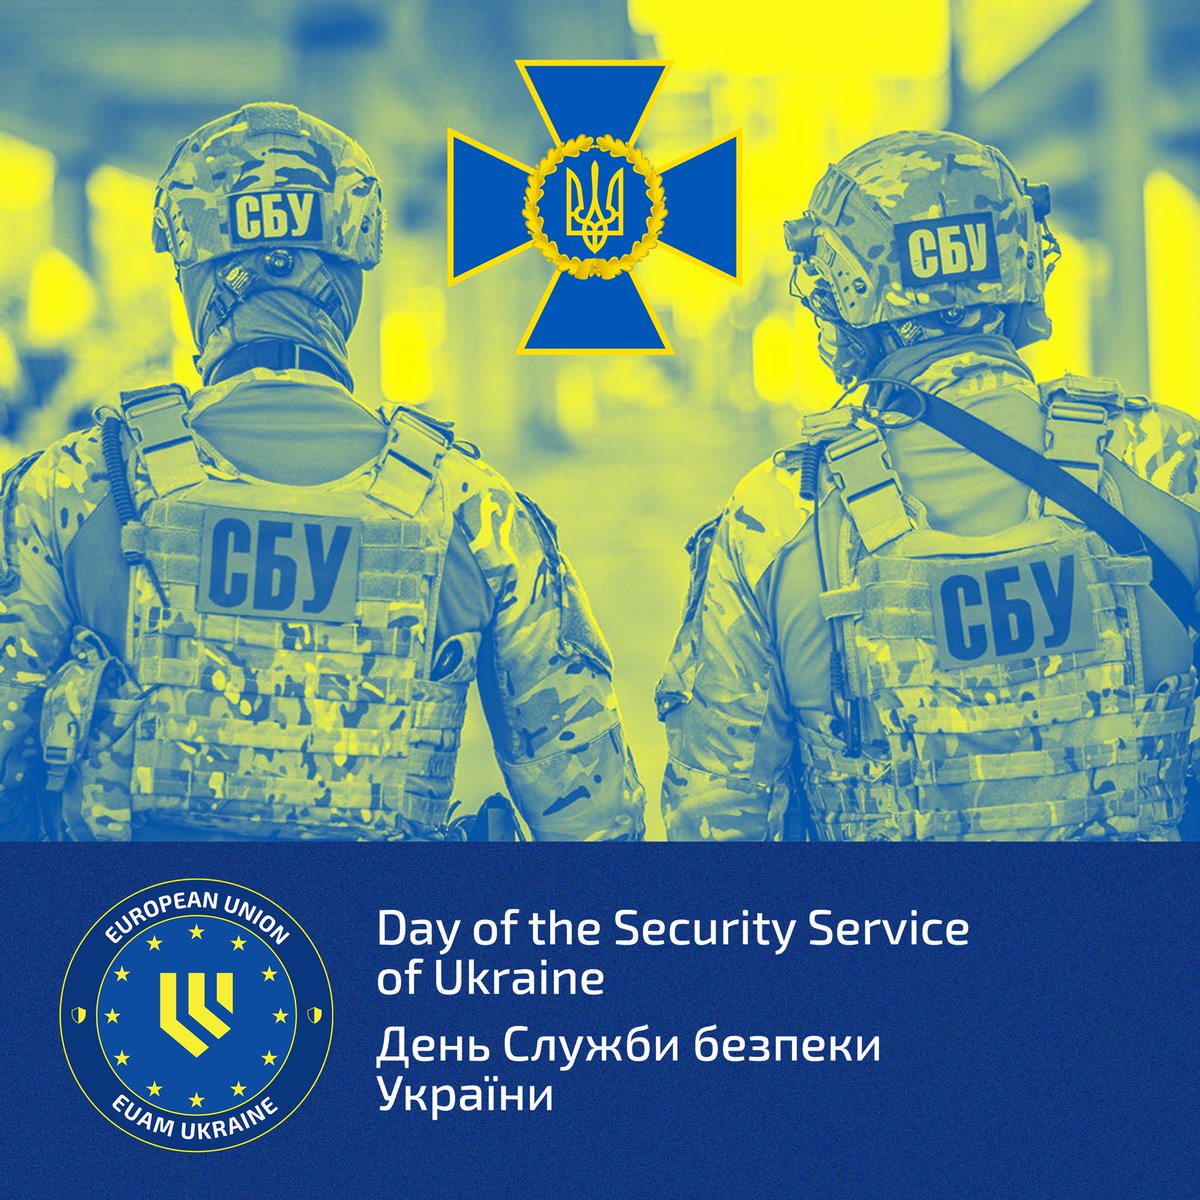 Congratulations to the professionals whose mission is to ensure the security of Ukraine and its citizens. #securityservice